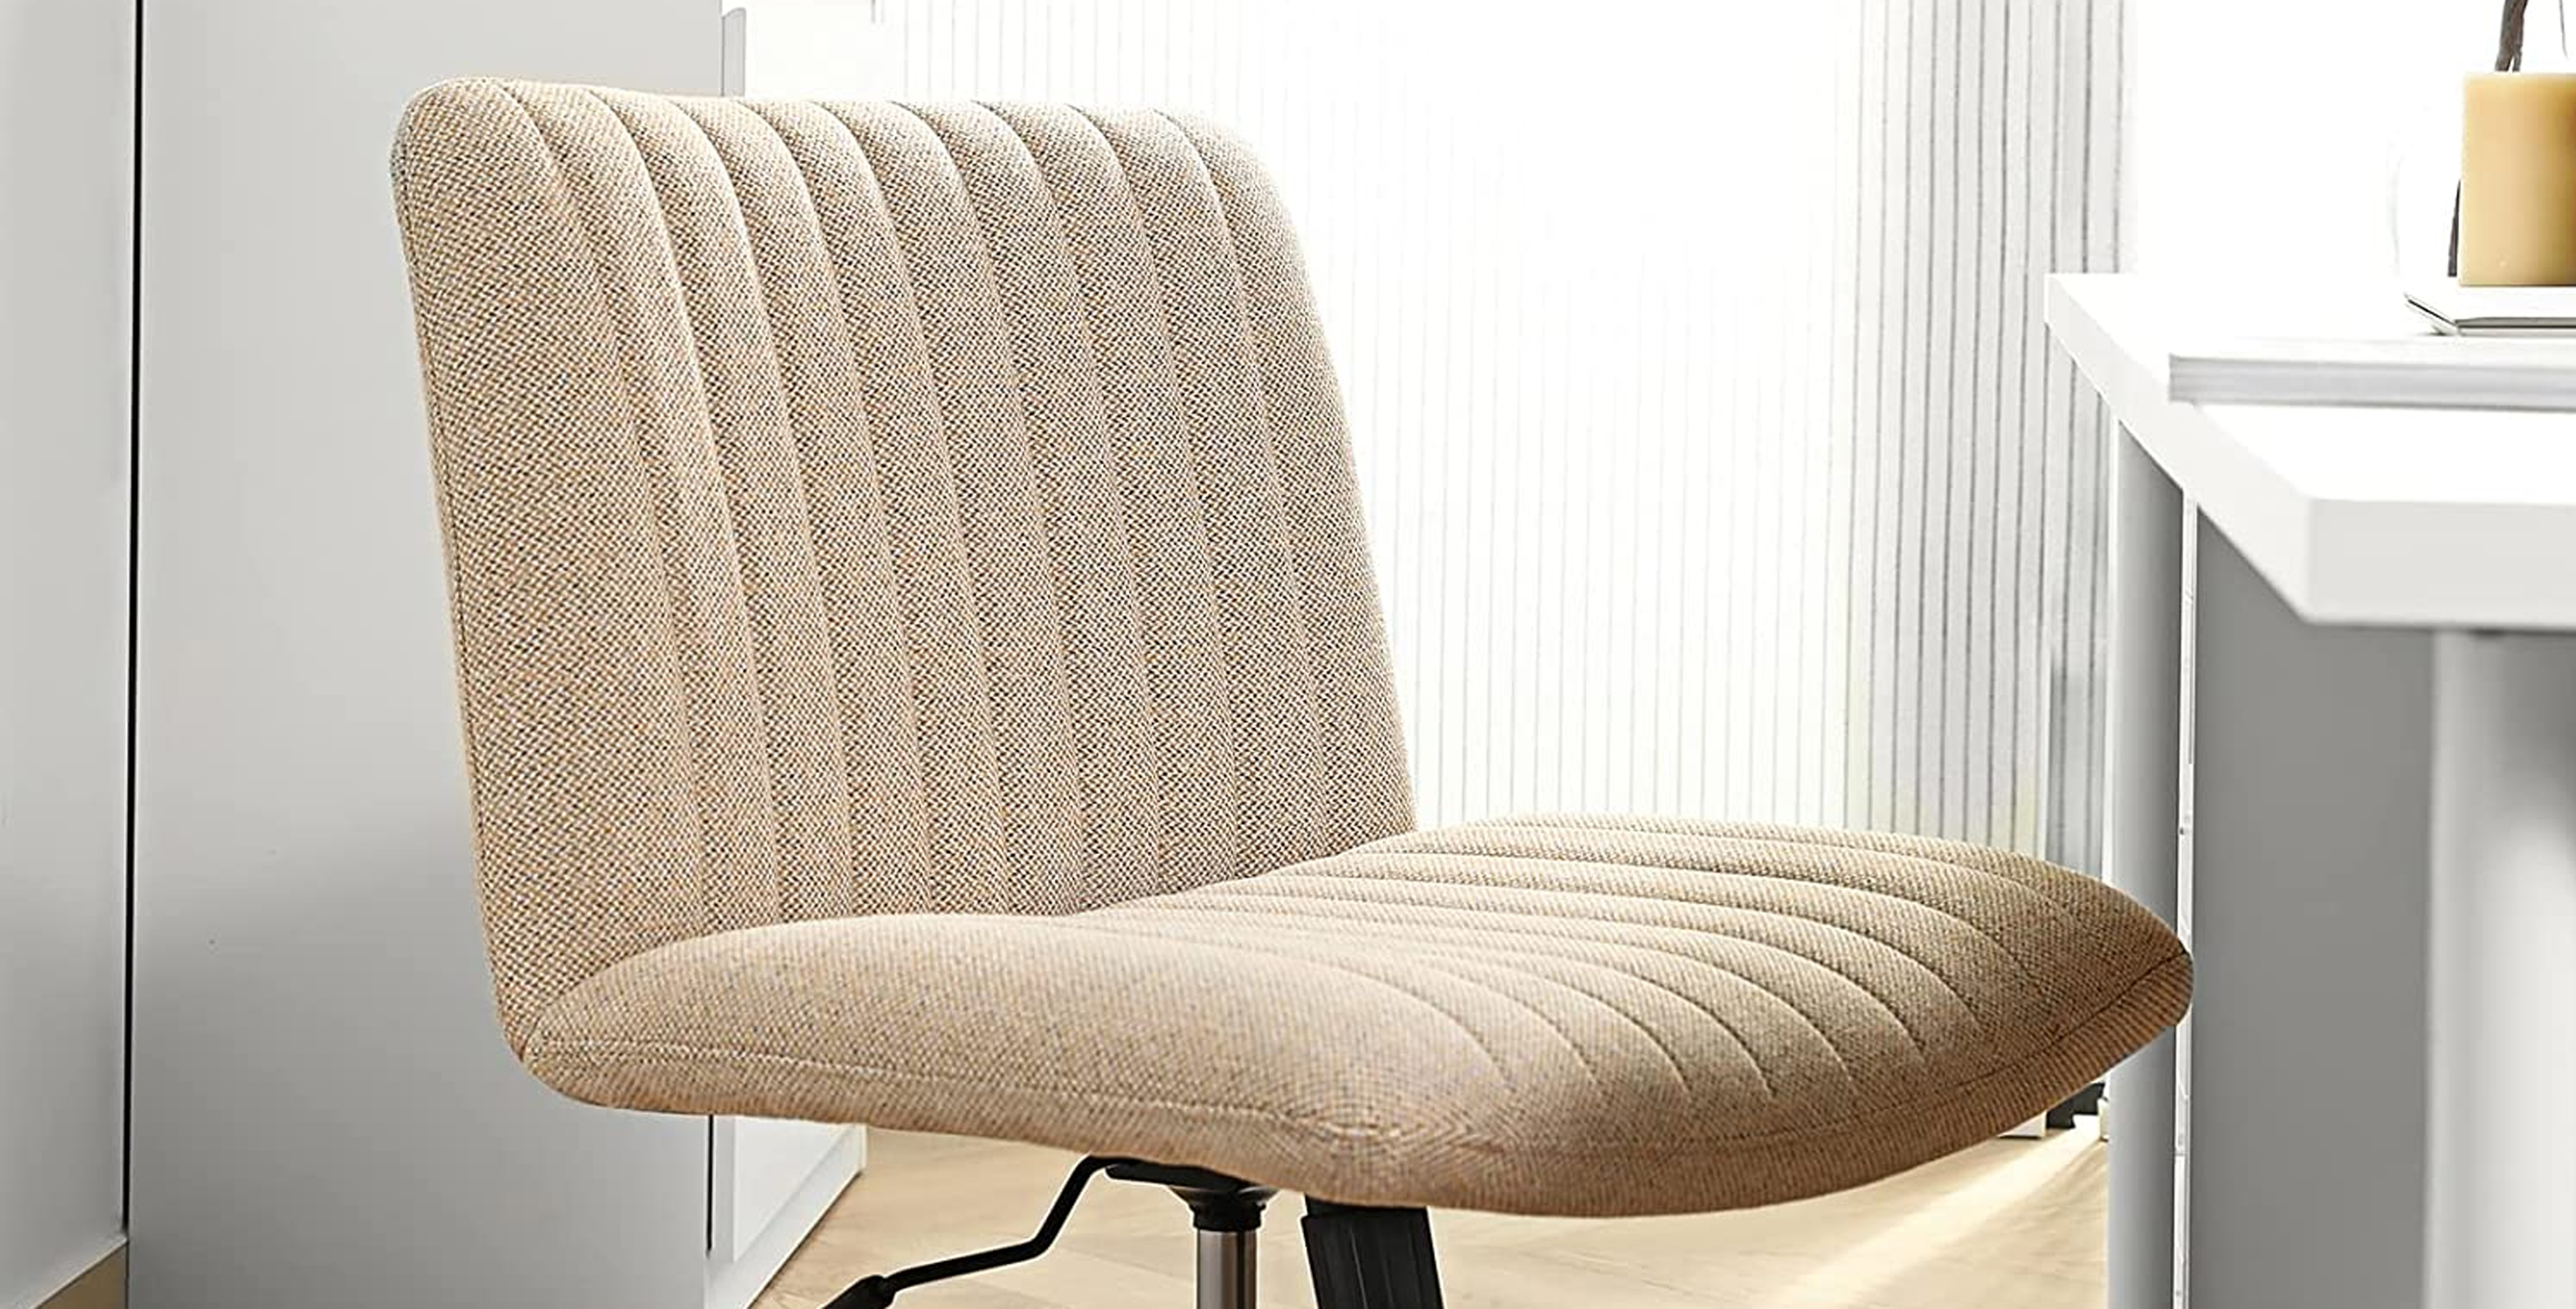 That viral  'criss-cross' chair isn't good for your back